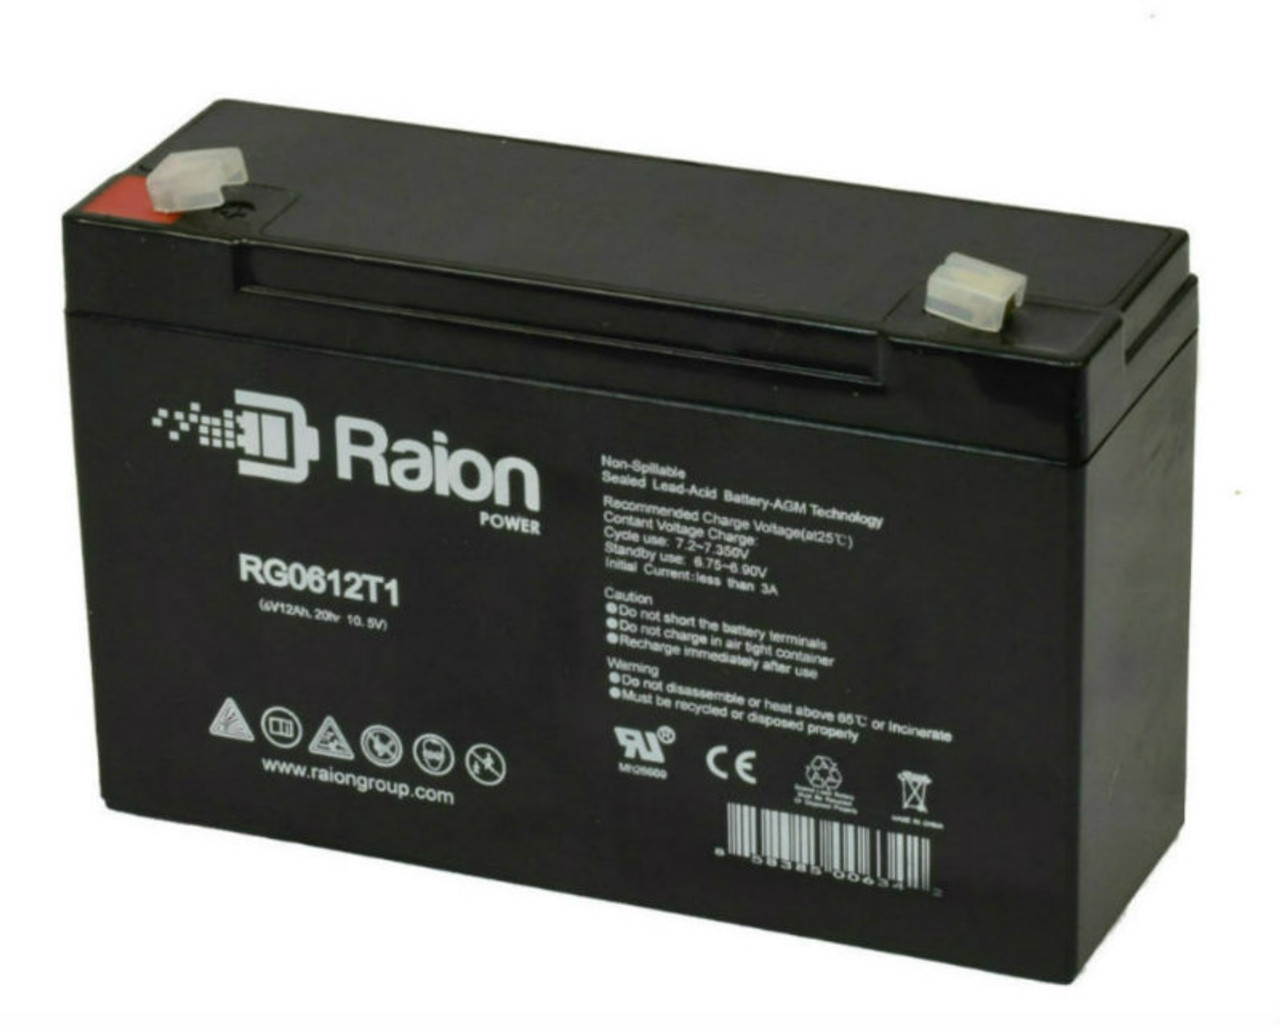 Raion Power RG06120T1 Replacement Battery for Yuasa NP12-6-F2